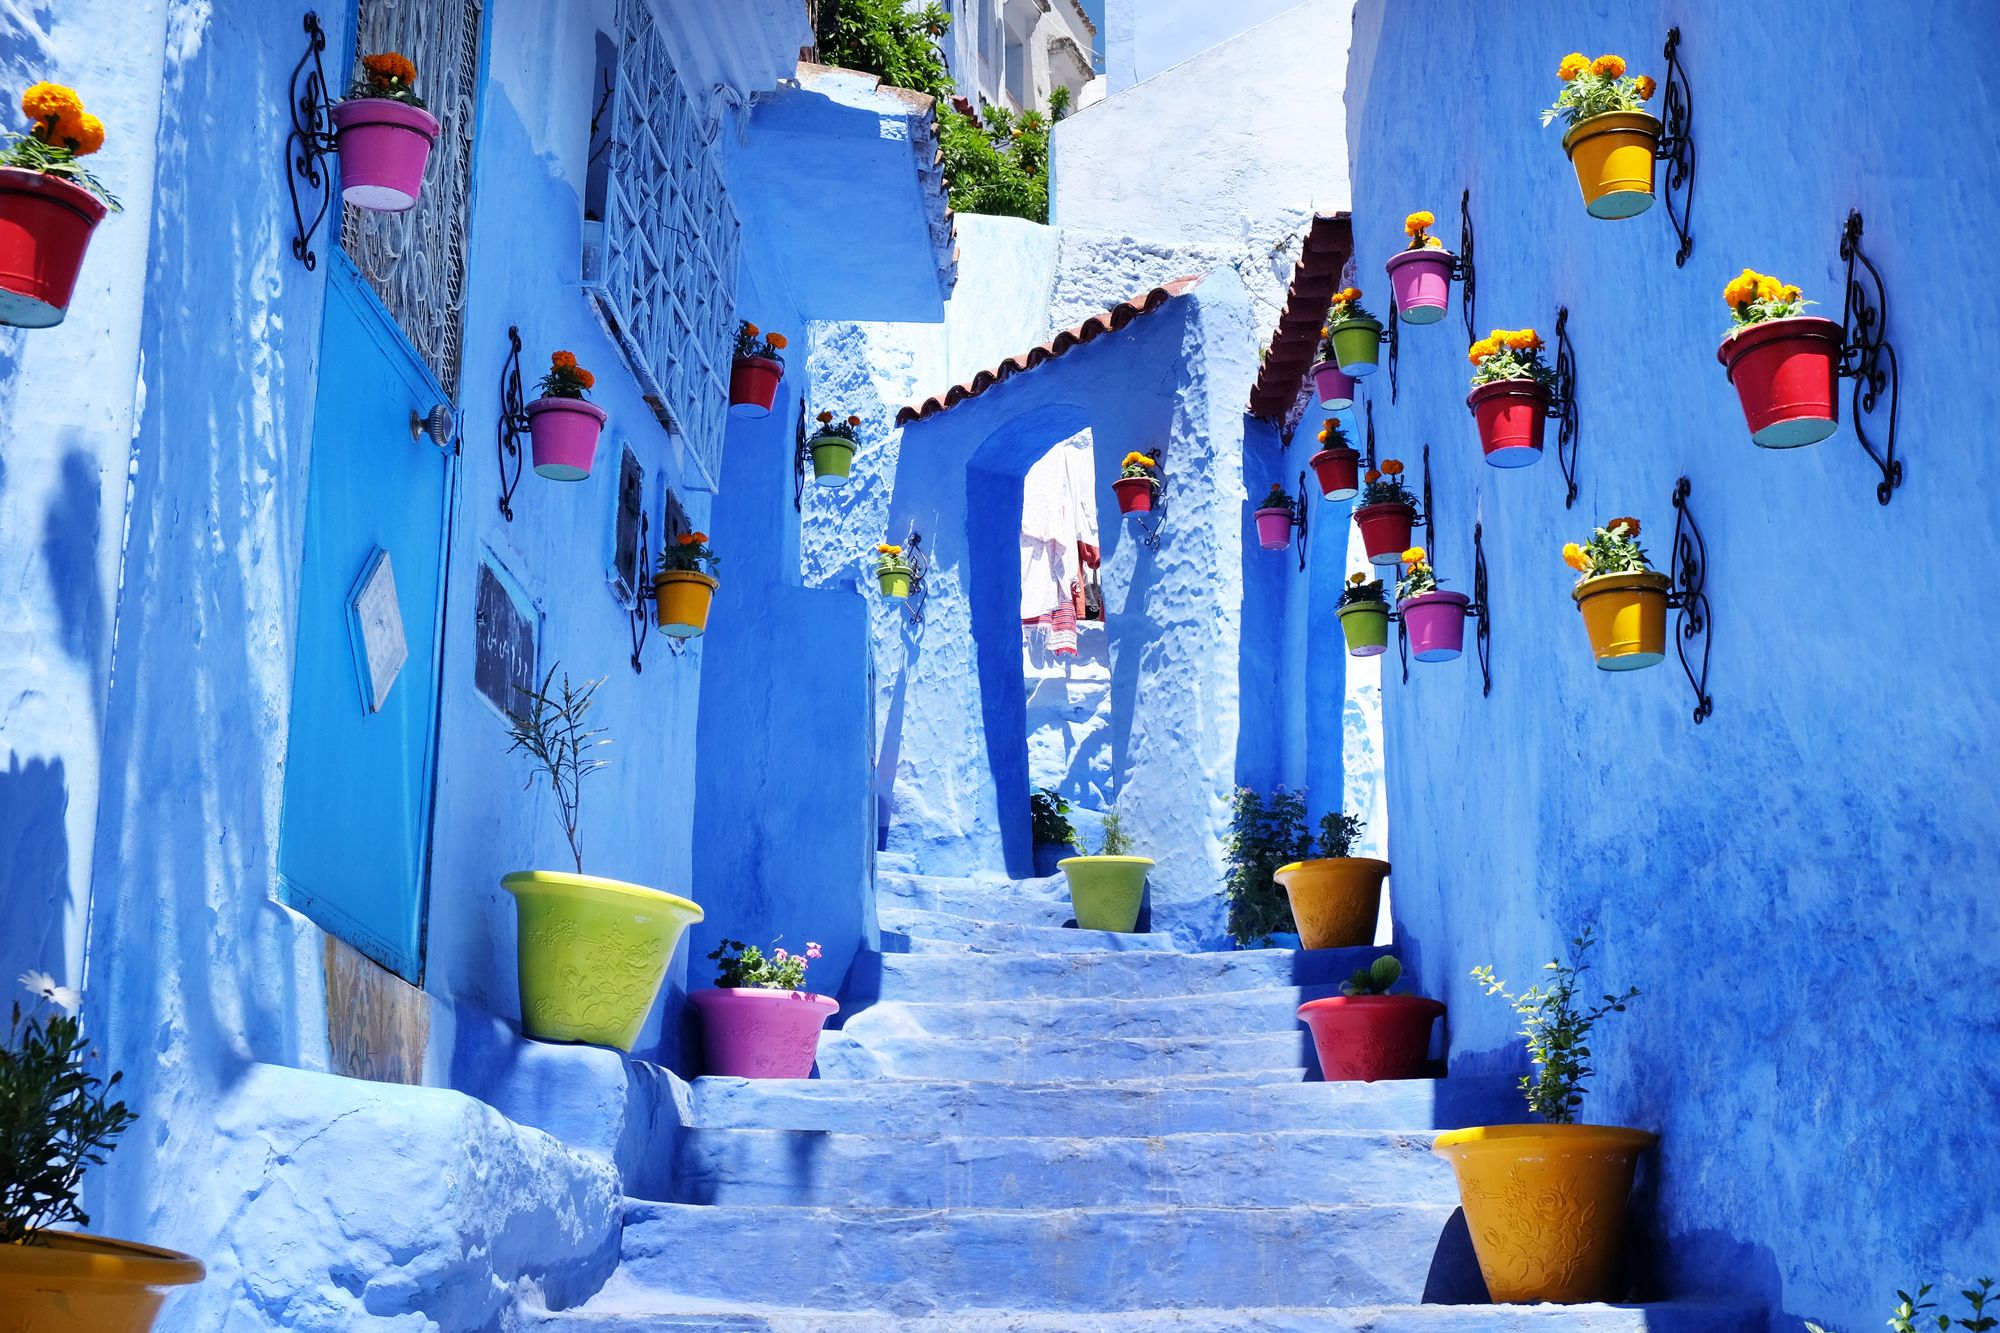 The blue city of Chefchaouen